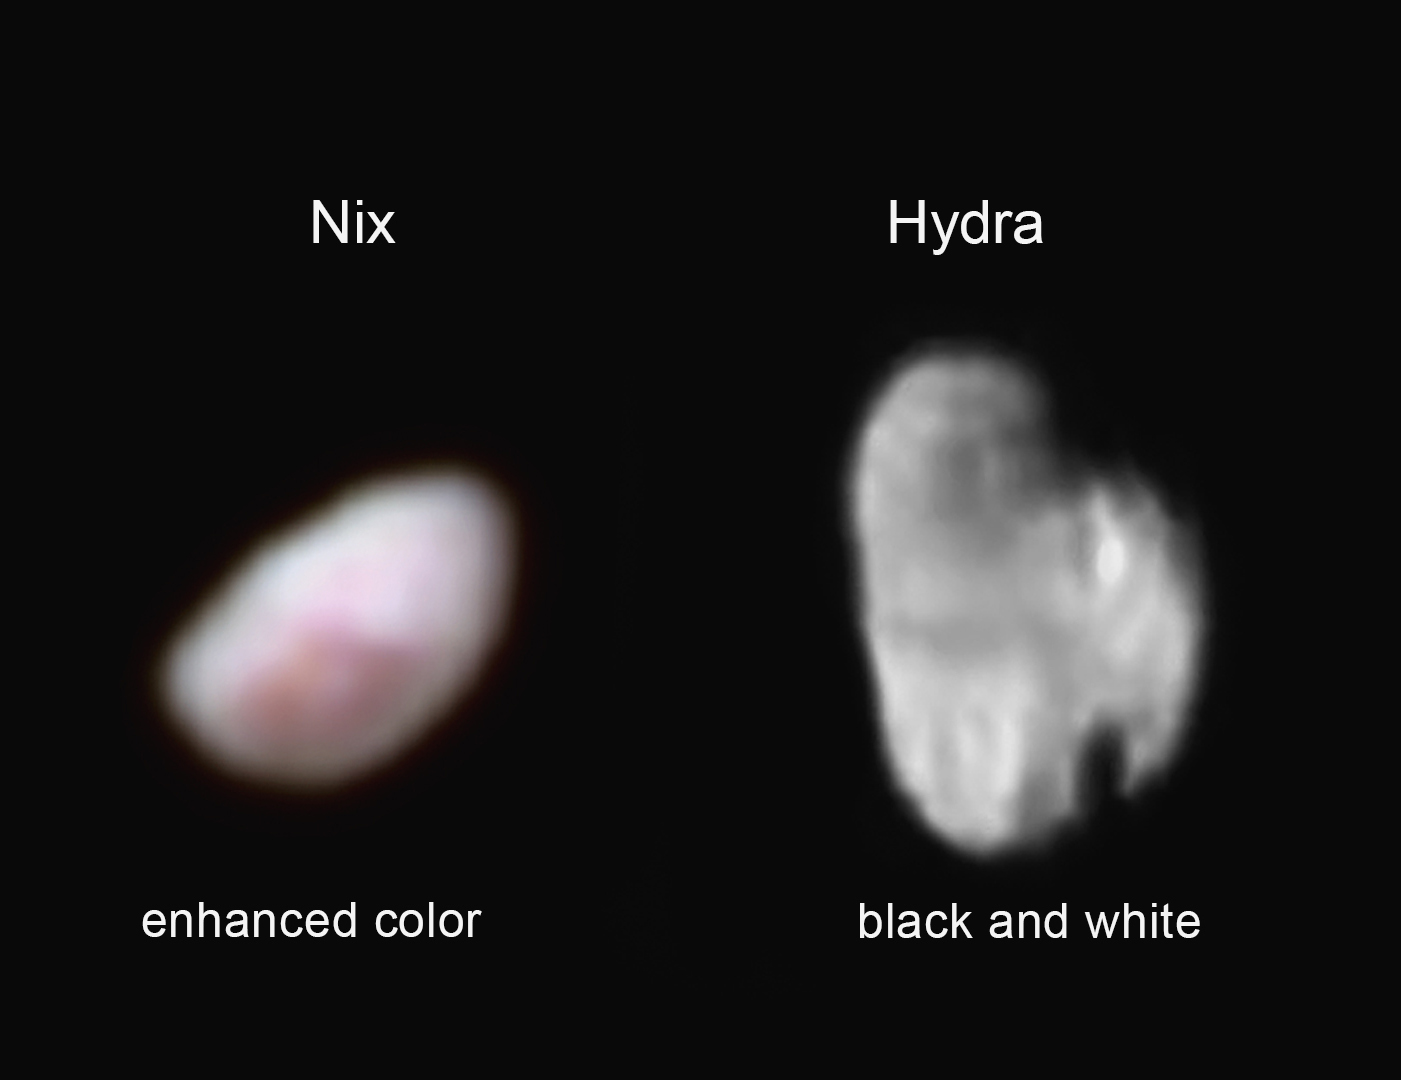 Pluto's moon Nix (left), shown here in enhanced color has a reddish spot that has attracted the interest of mission scientists. Meanwhile, Pluto's small, irregularly shaped moon Hydra (right) is revealed in this black and white image. Credit: NASA/JHUAPL/SWRI